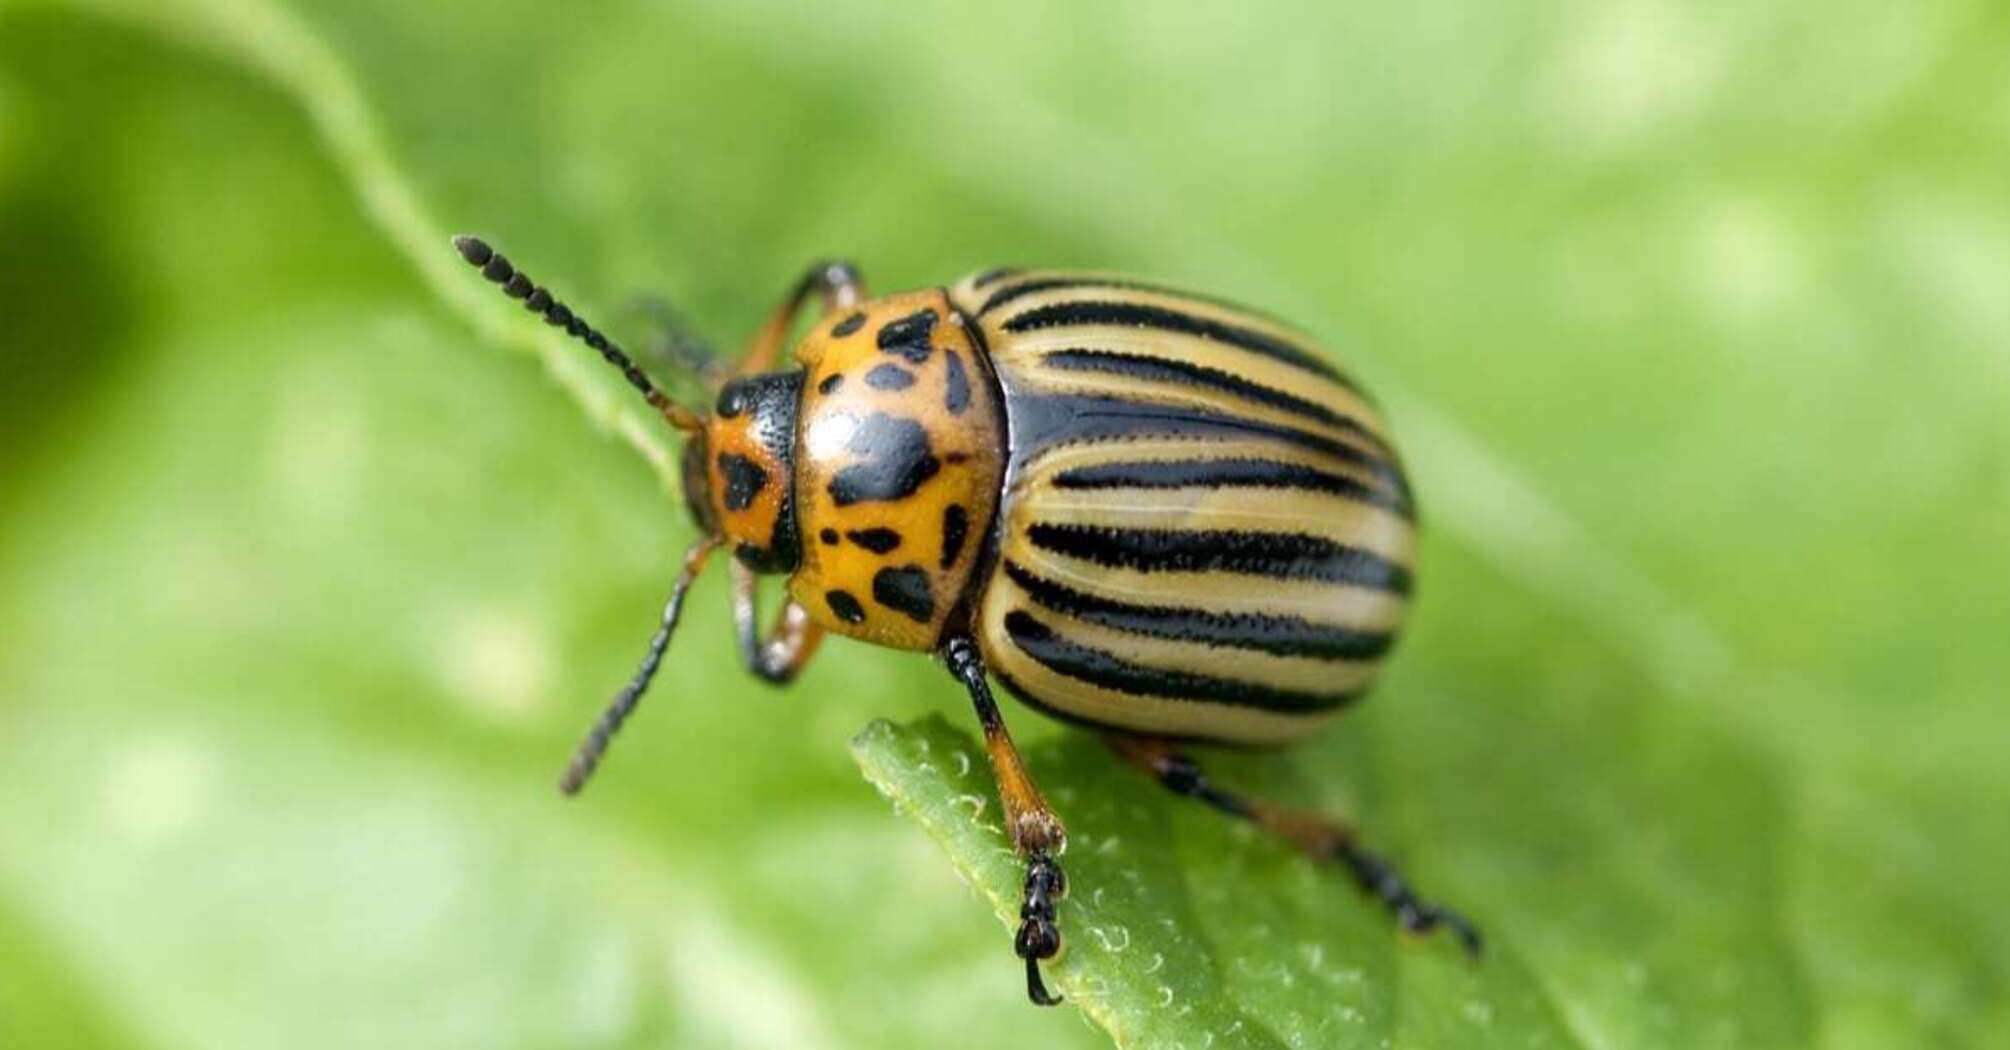 Treat potatoes with this solution only once and there will be no Colorado potato beetles